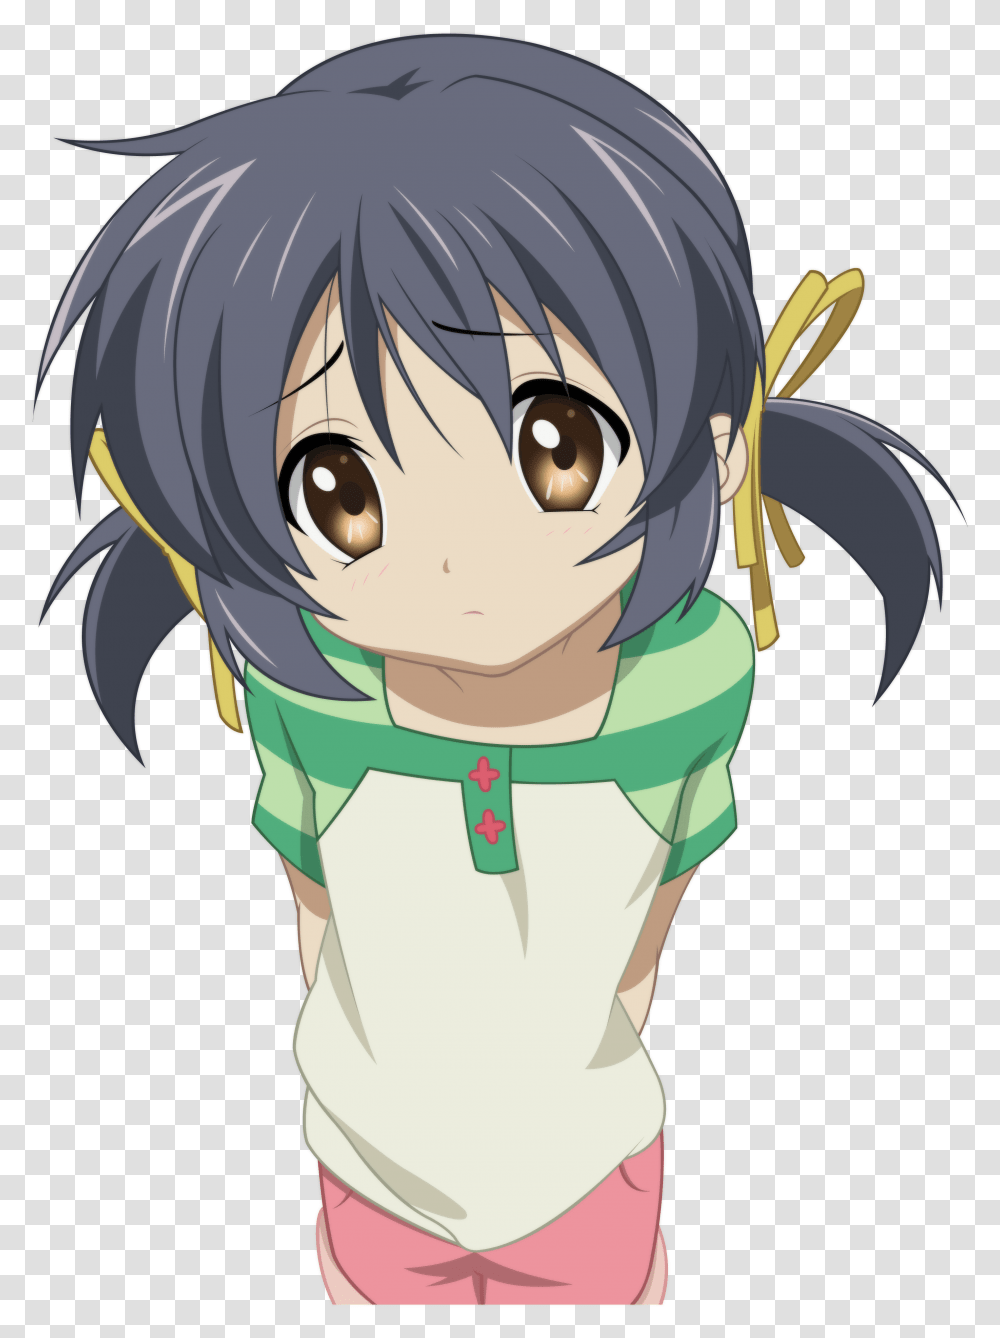 Browse Clannad Collected By Gabriel Reina And Make Mei Sunohara, Helmet, Apparel, Manga Transparent Png